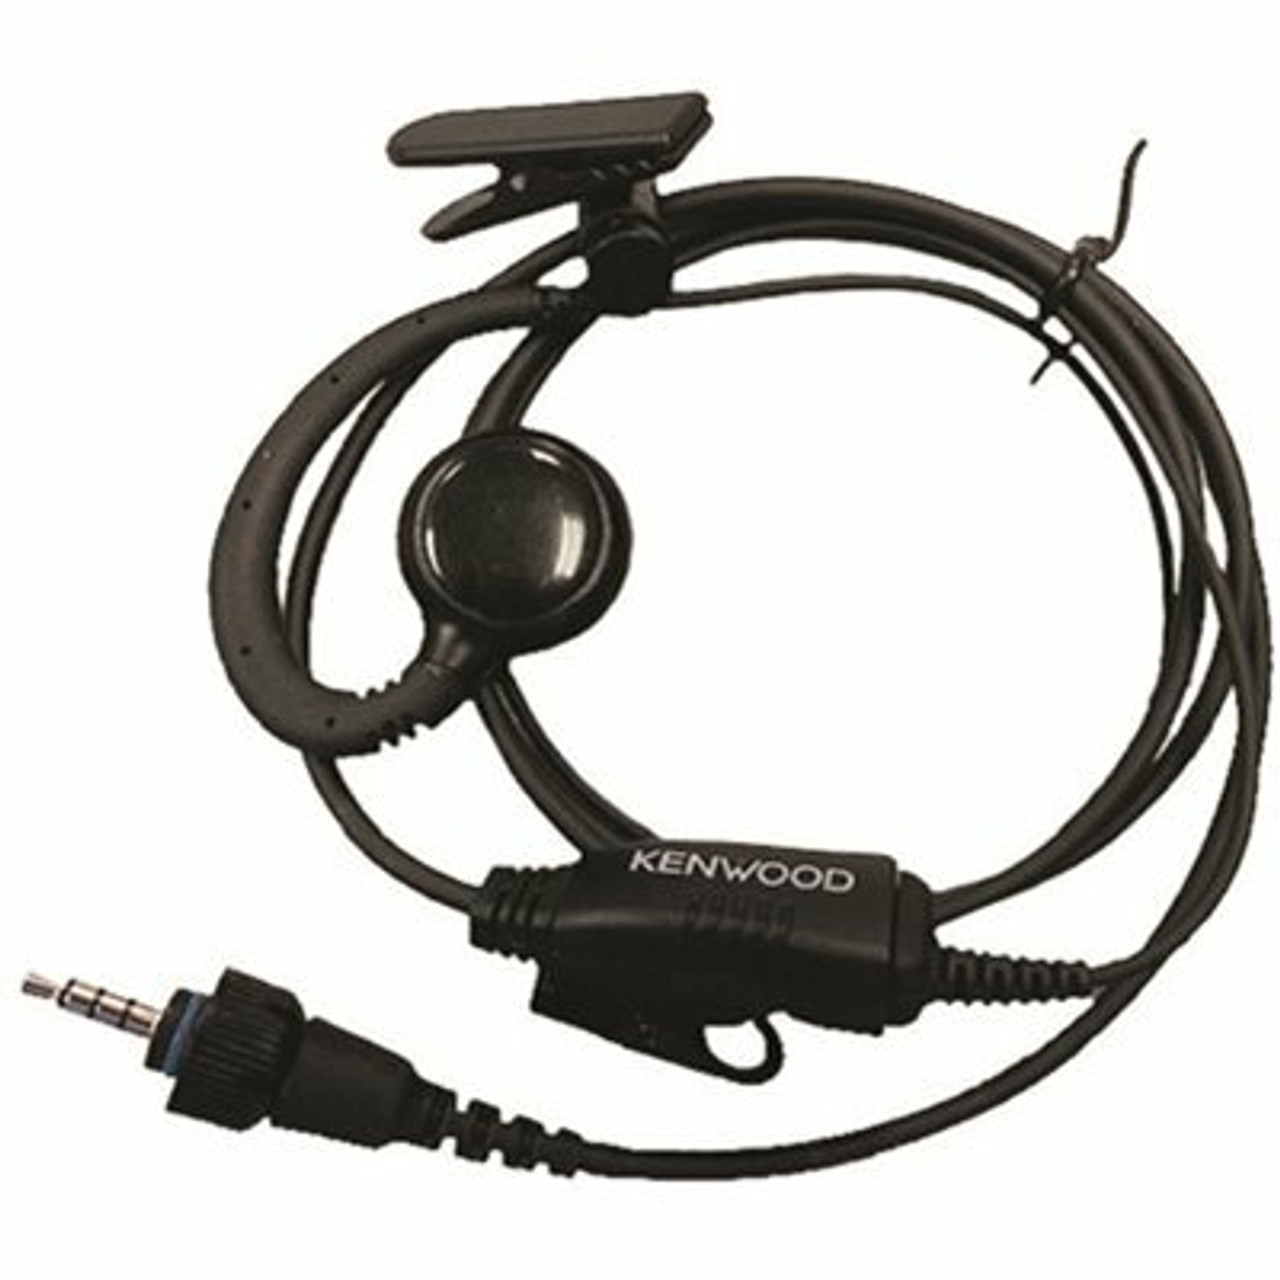 Kenwood C-Ring Ear Hanger With Ptt And Mic For Nx-P500K Protalk Digital Radio